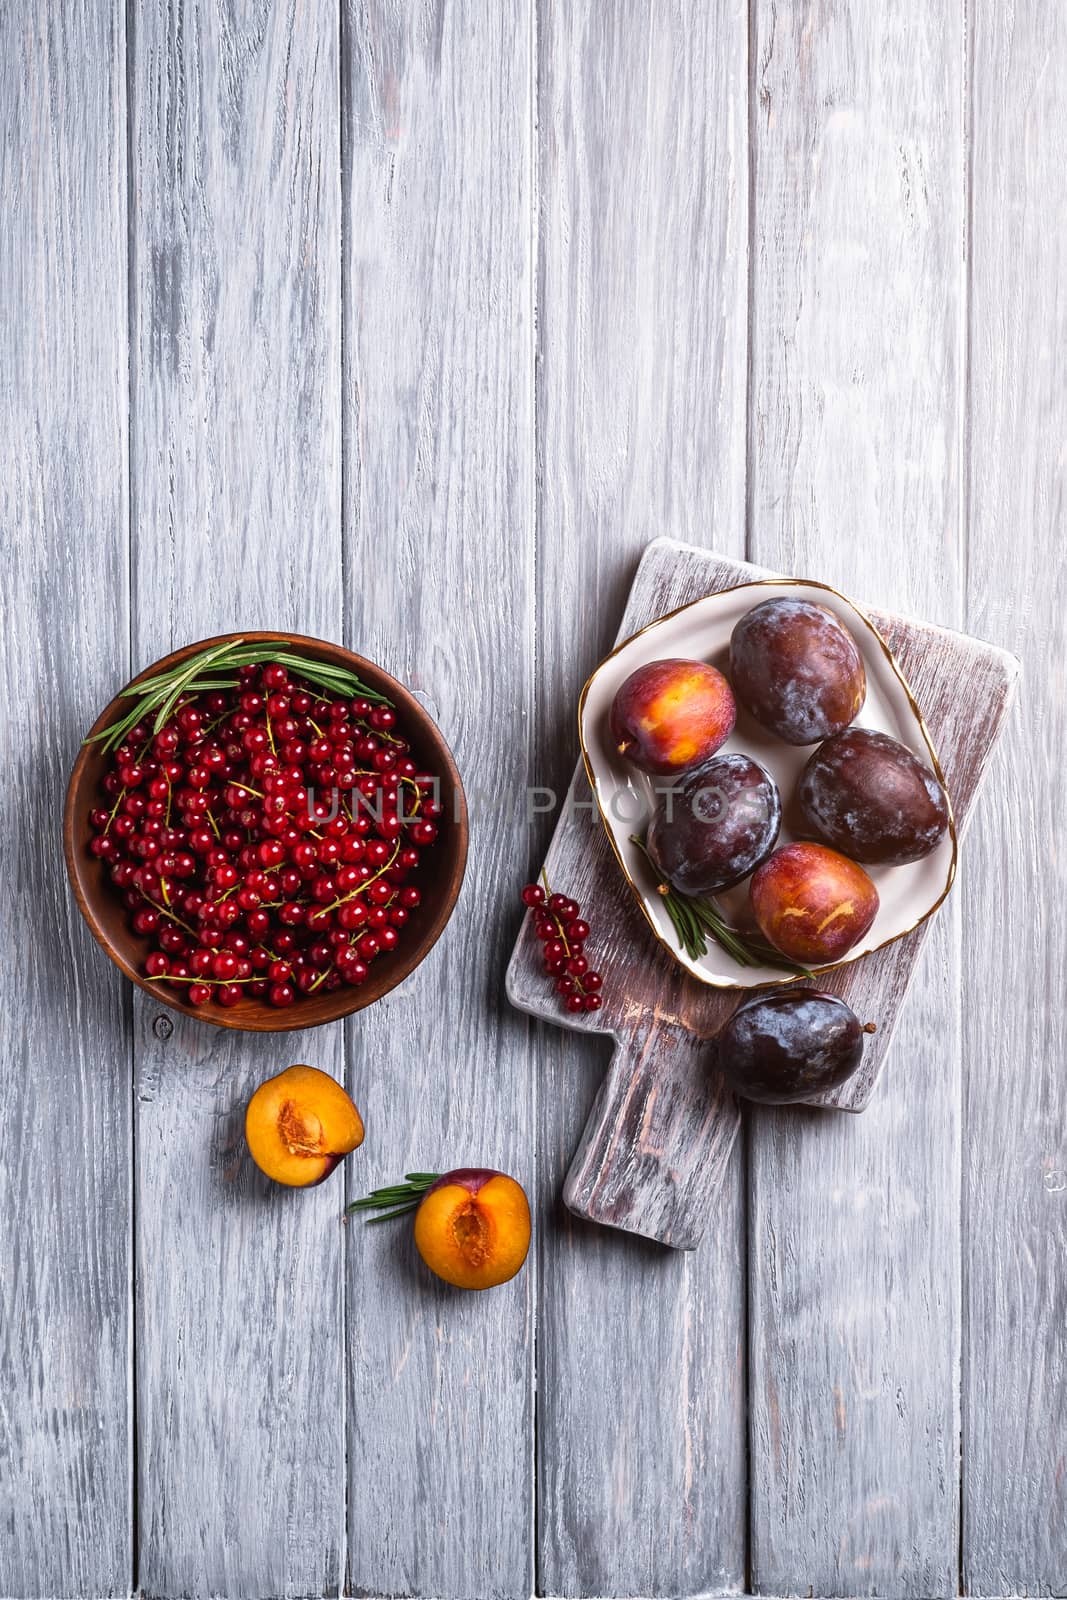 Fresh sweet plum fruits whole and sliced in plate with rosemary leaves on old cutting board with red currant berries in wooden bowl, grey wood background, top view copy space